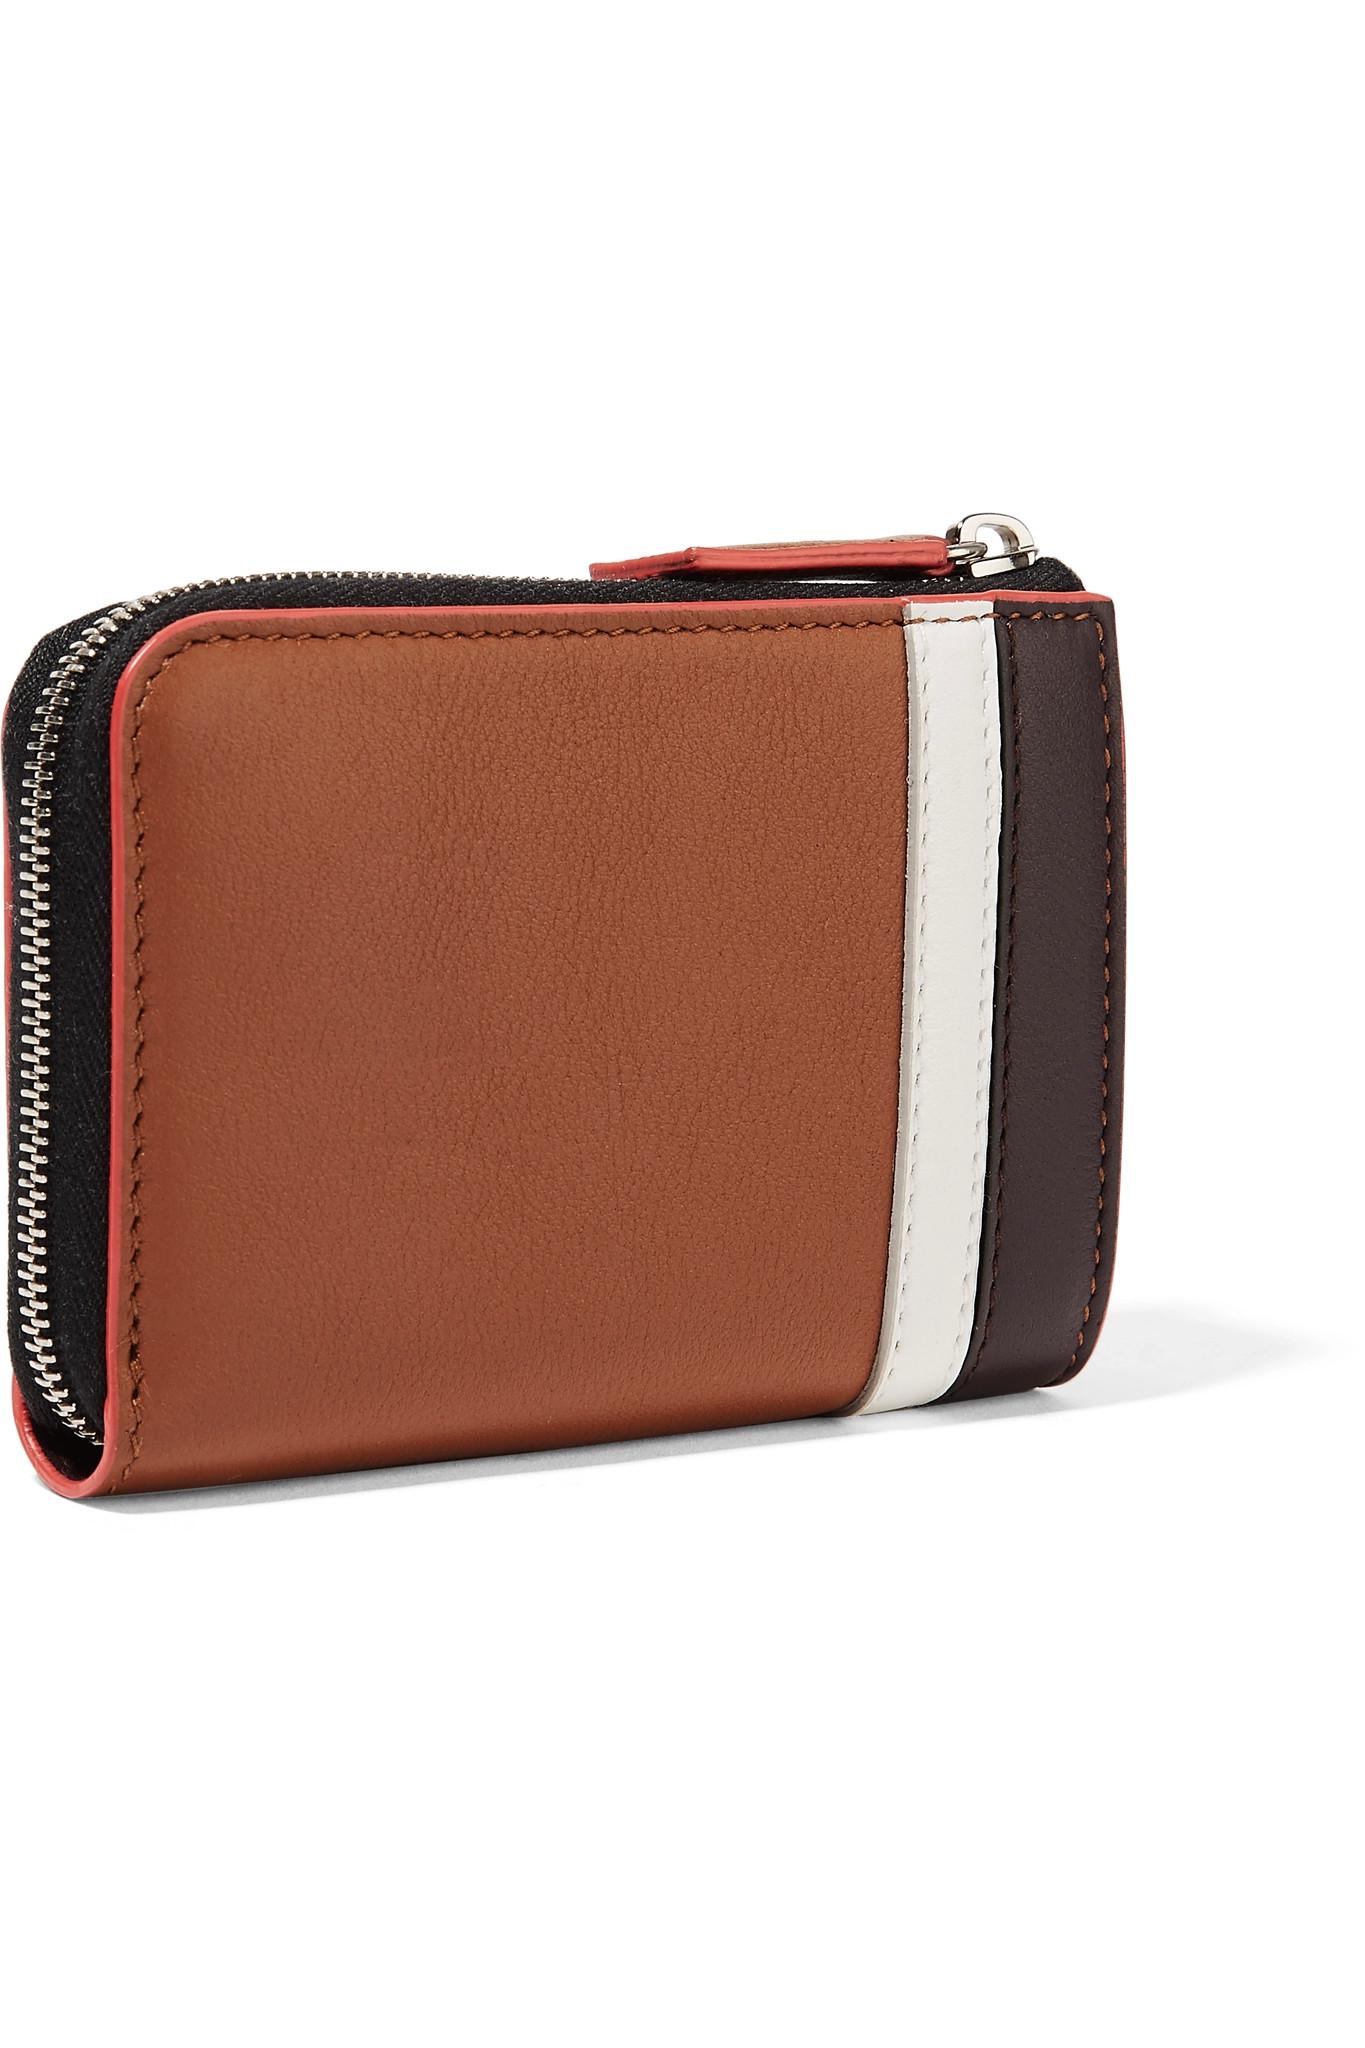 Emilio Pucci Striped Leather Wallet in Brown - Lyst